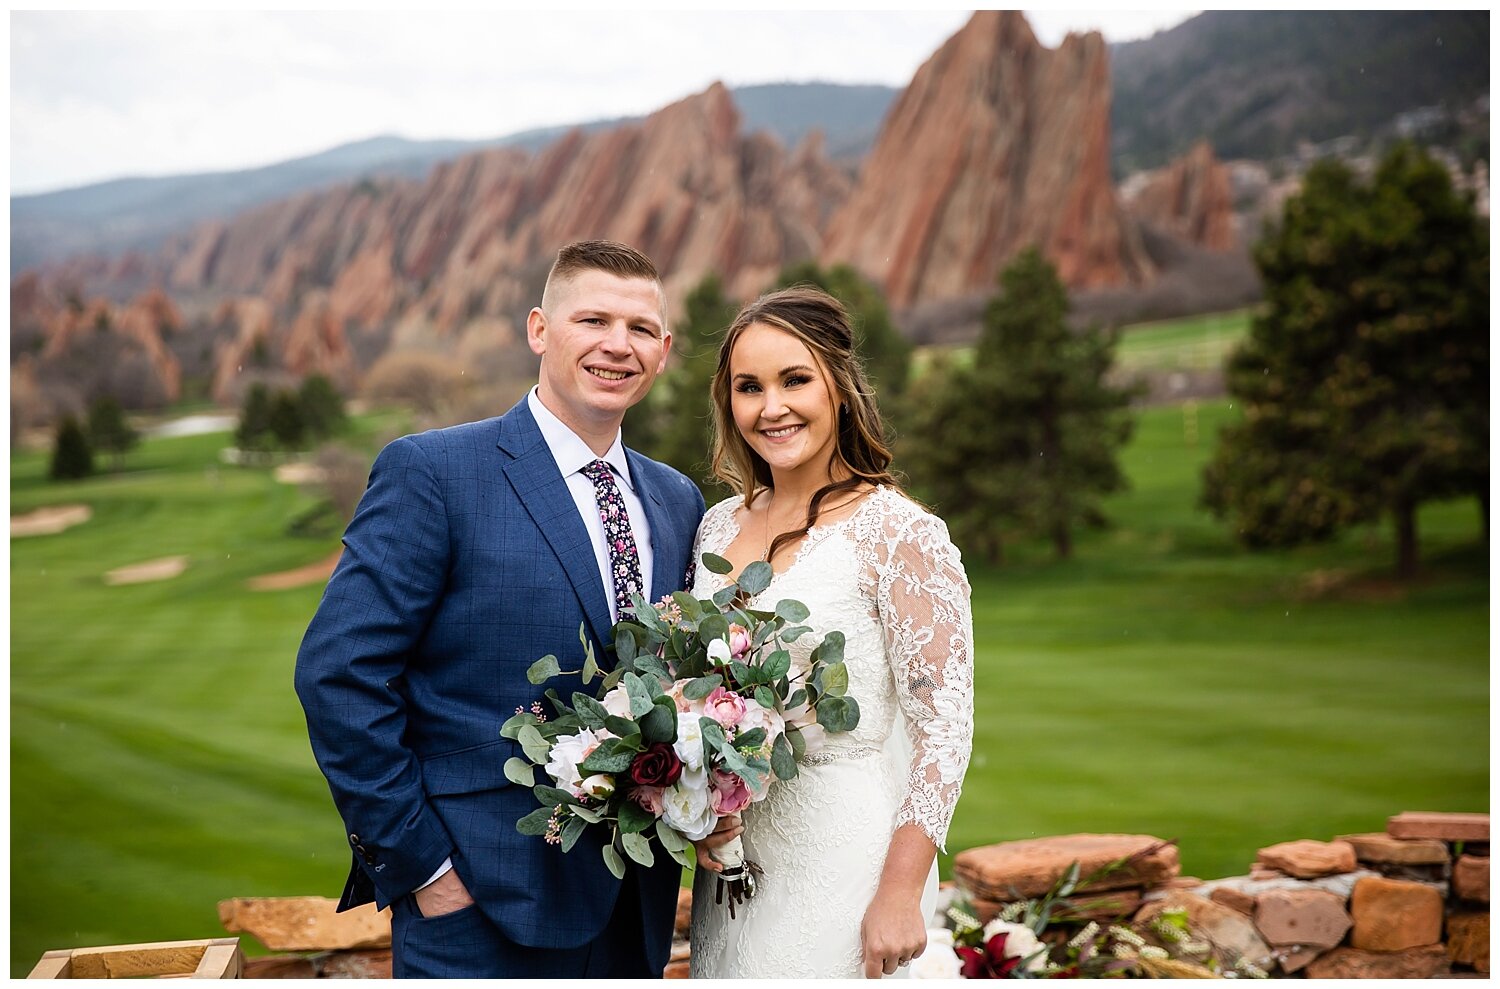 Molly and Nick's Wedding Day|Arrowhead Golf Course Elopement_0050.jpg